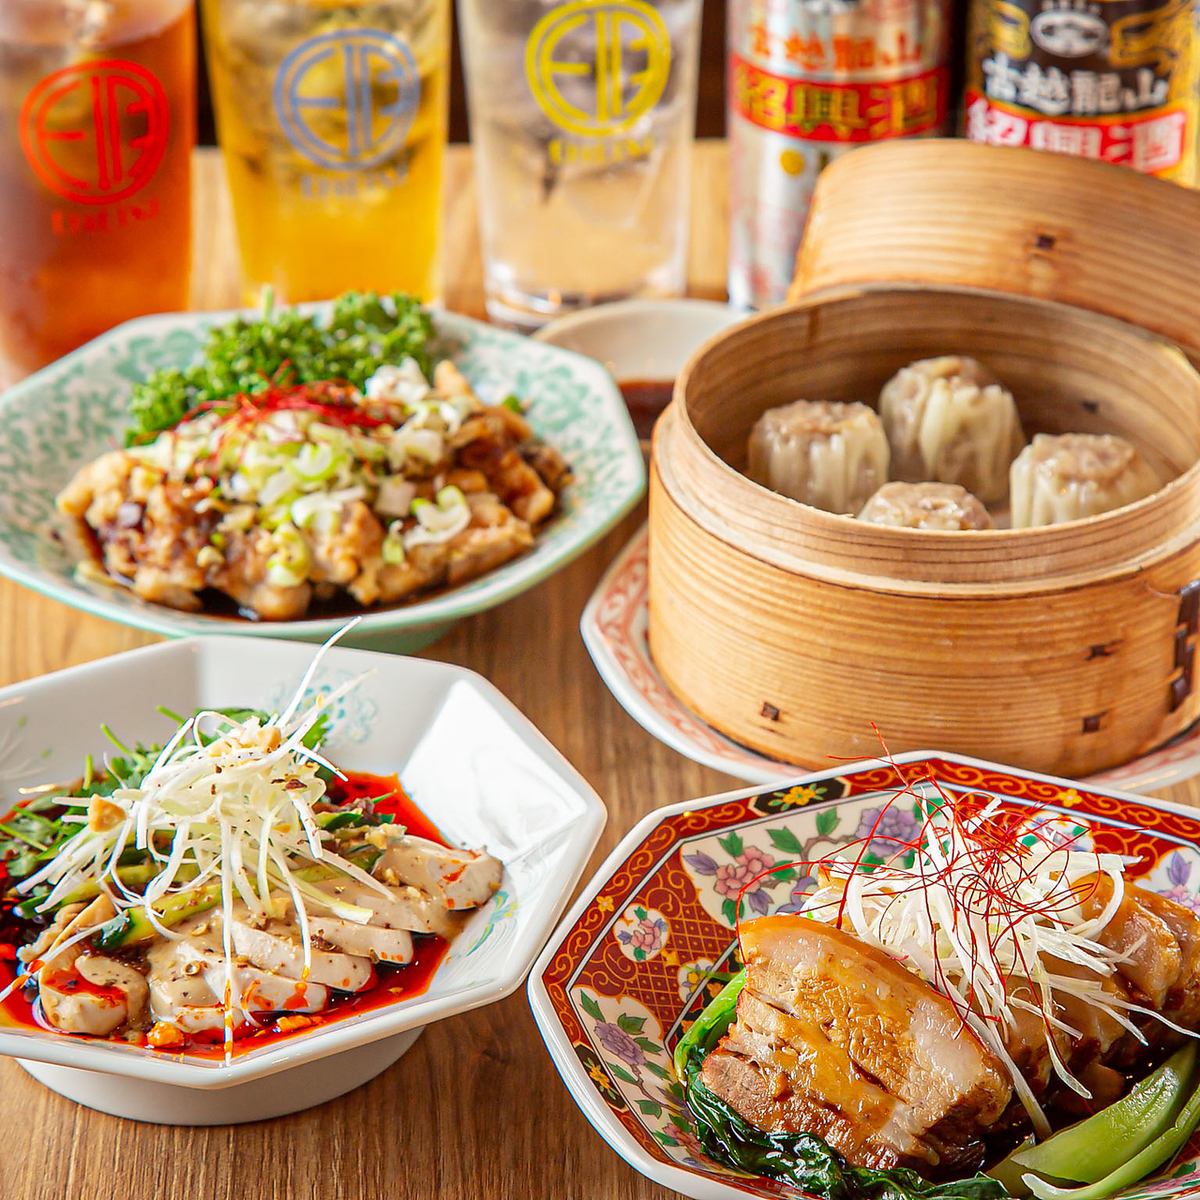 ◇A restaurant where you can enjoy authentic Chinese food that goes perfectly with alcohol◇